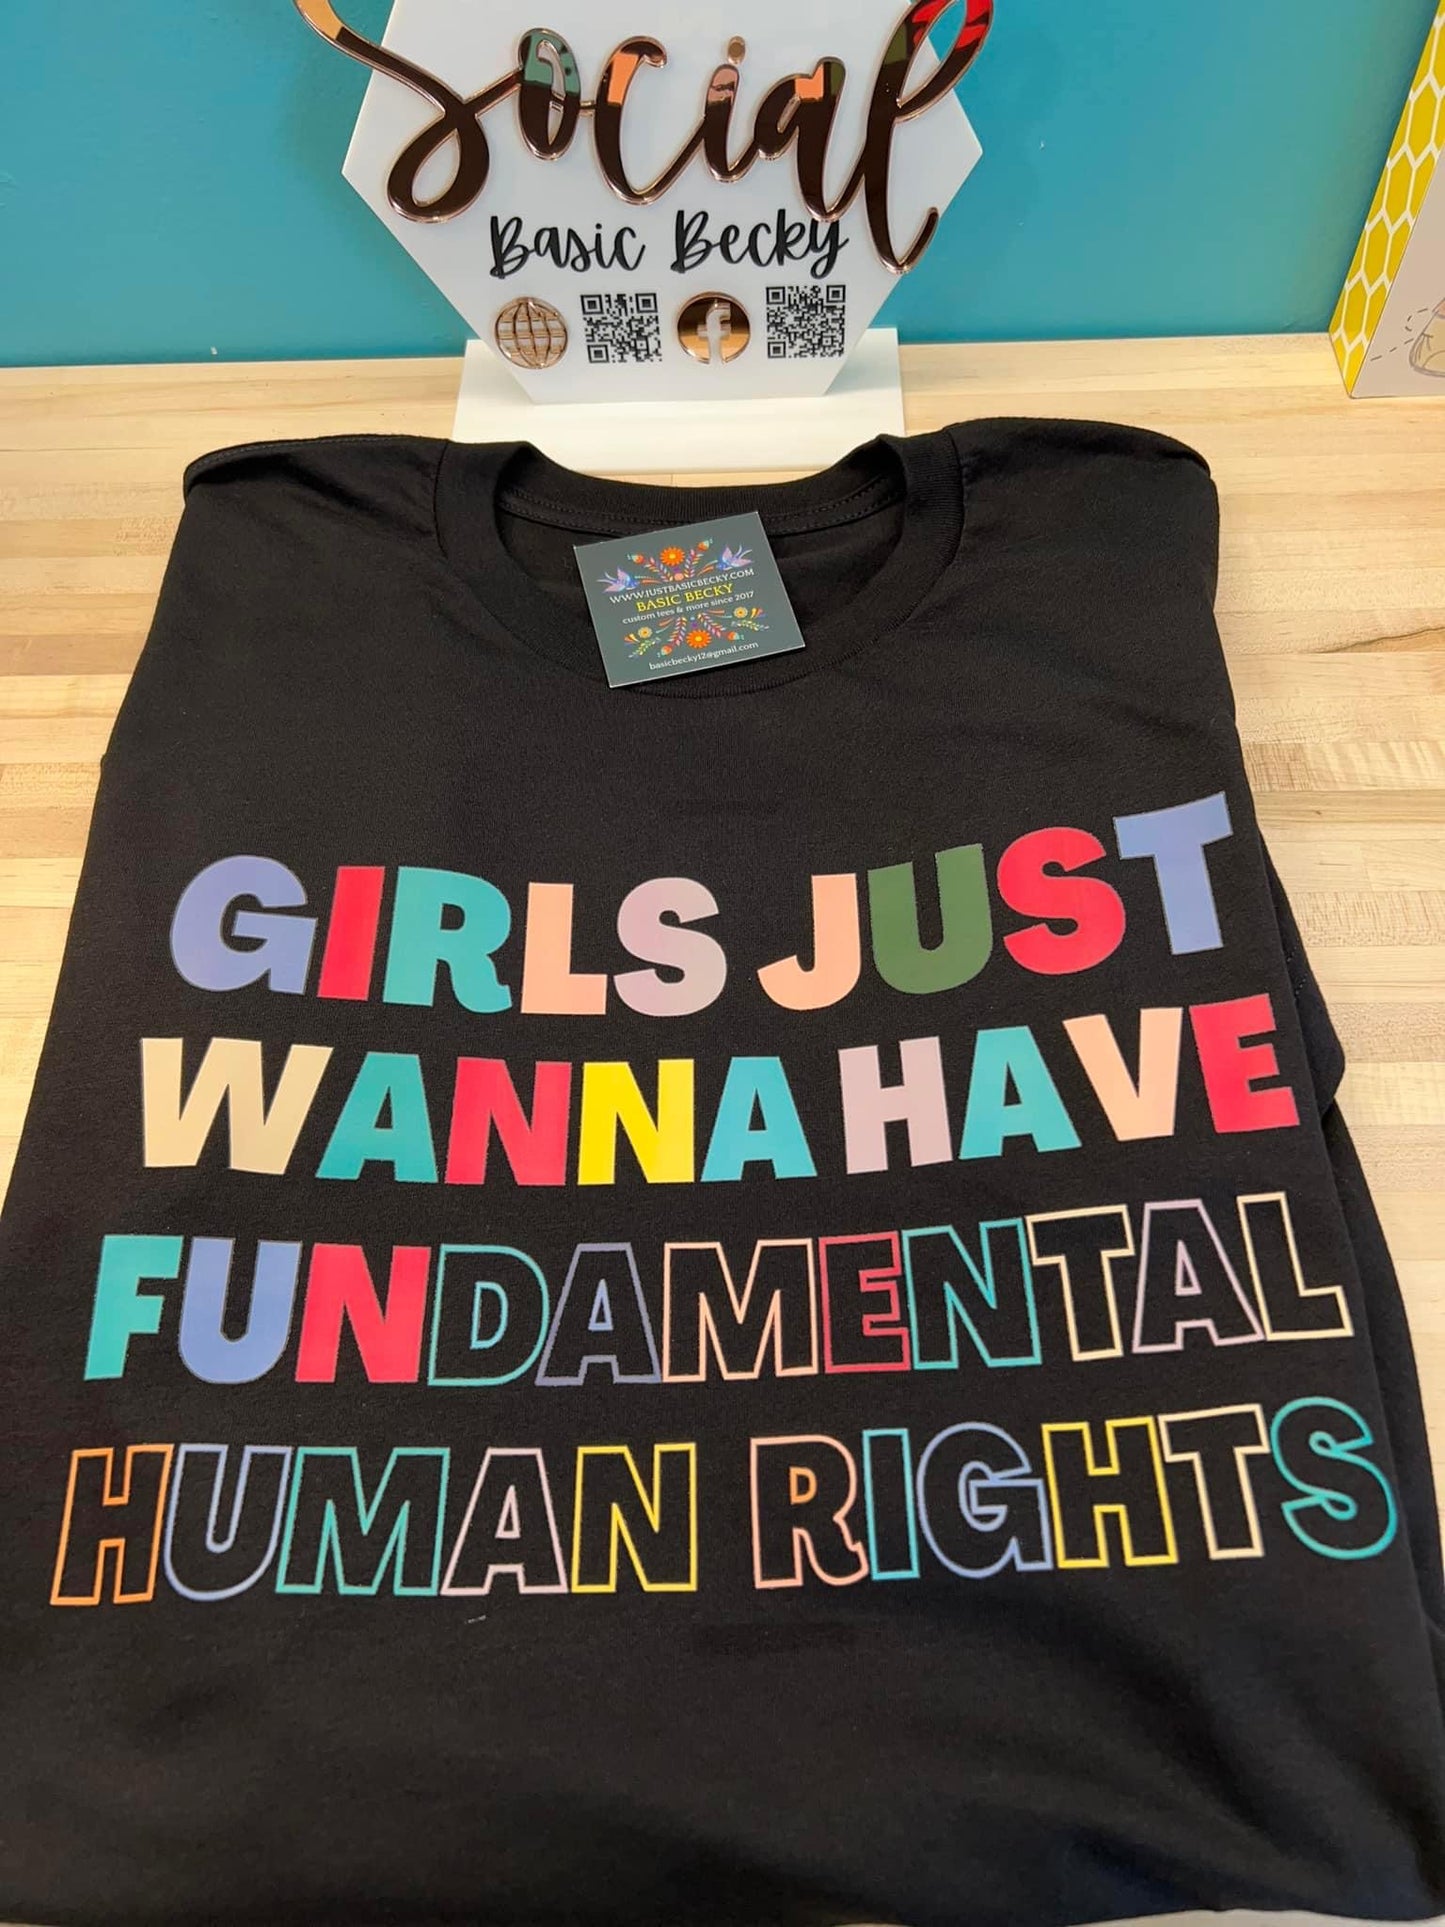 GIRLS JUST WANT TO HAVE FUNDAMENTAL RIGHTS